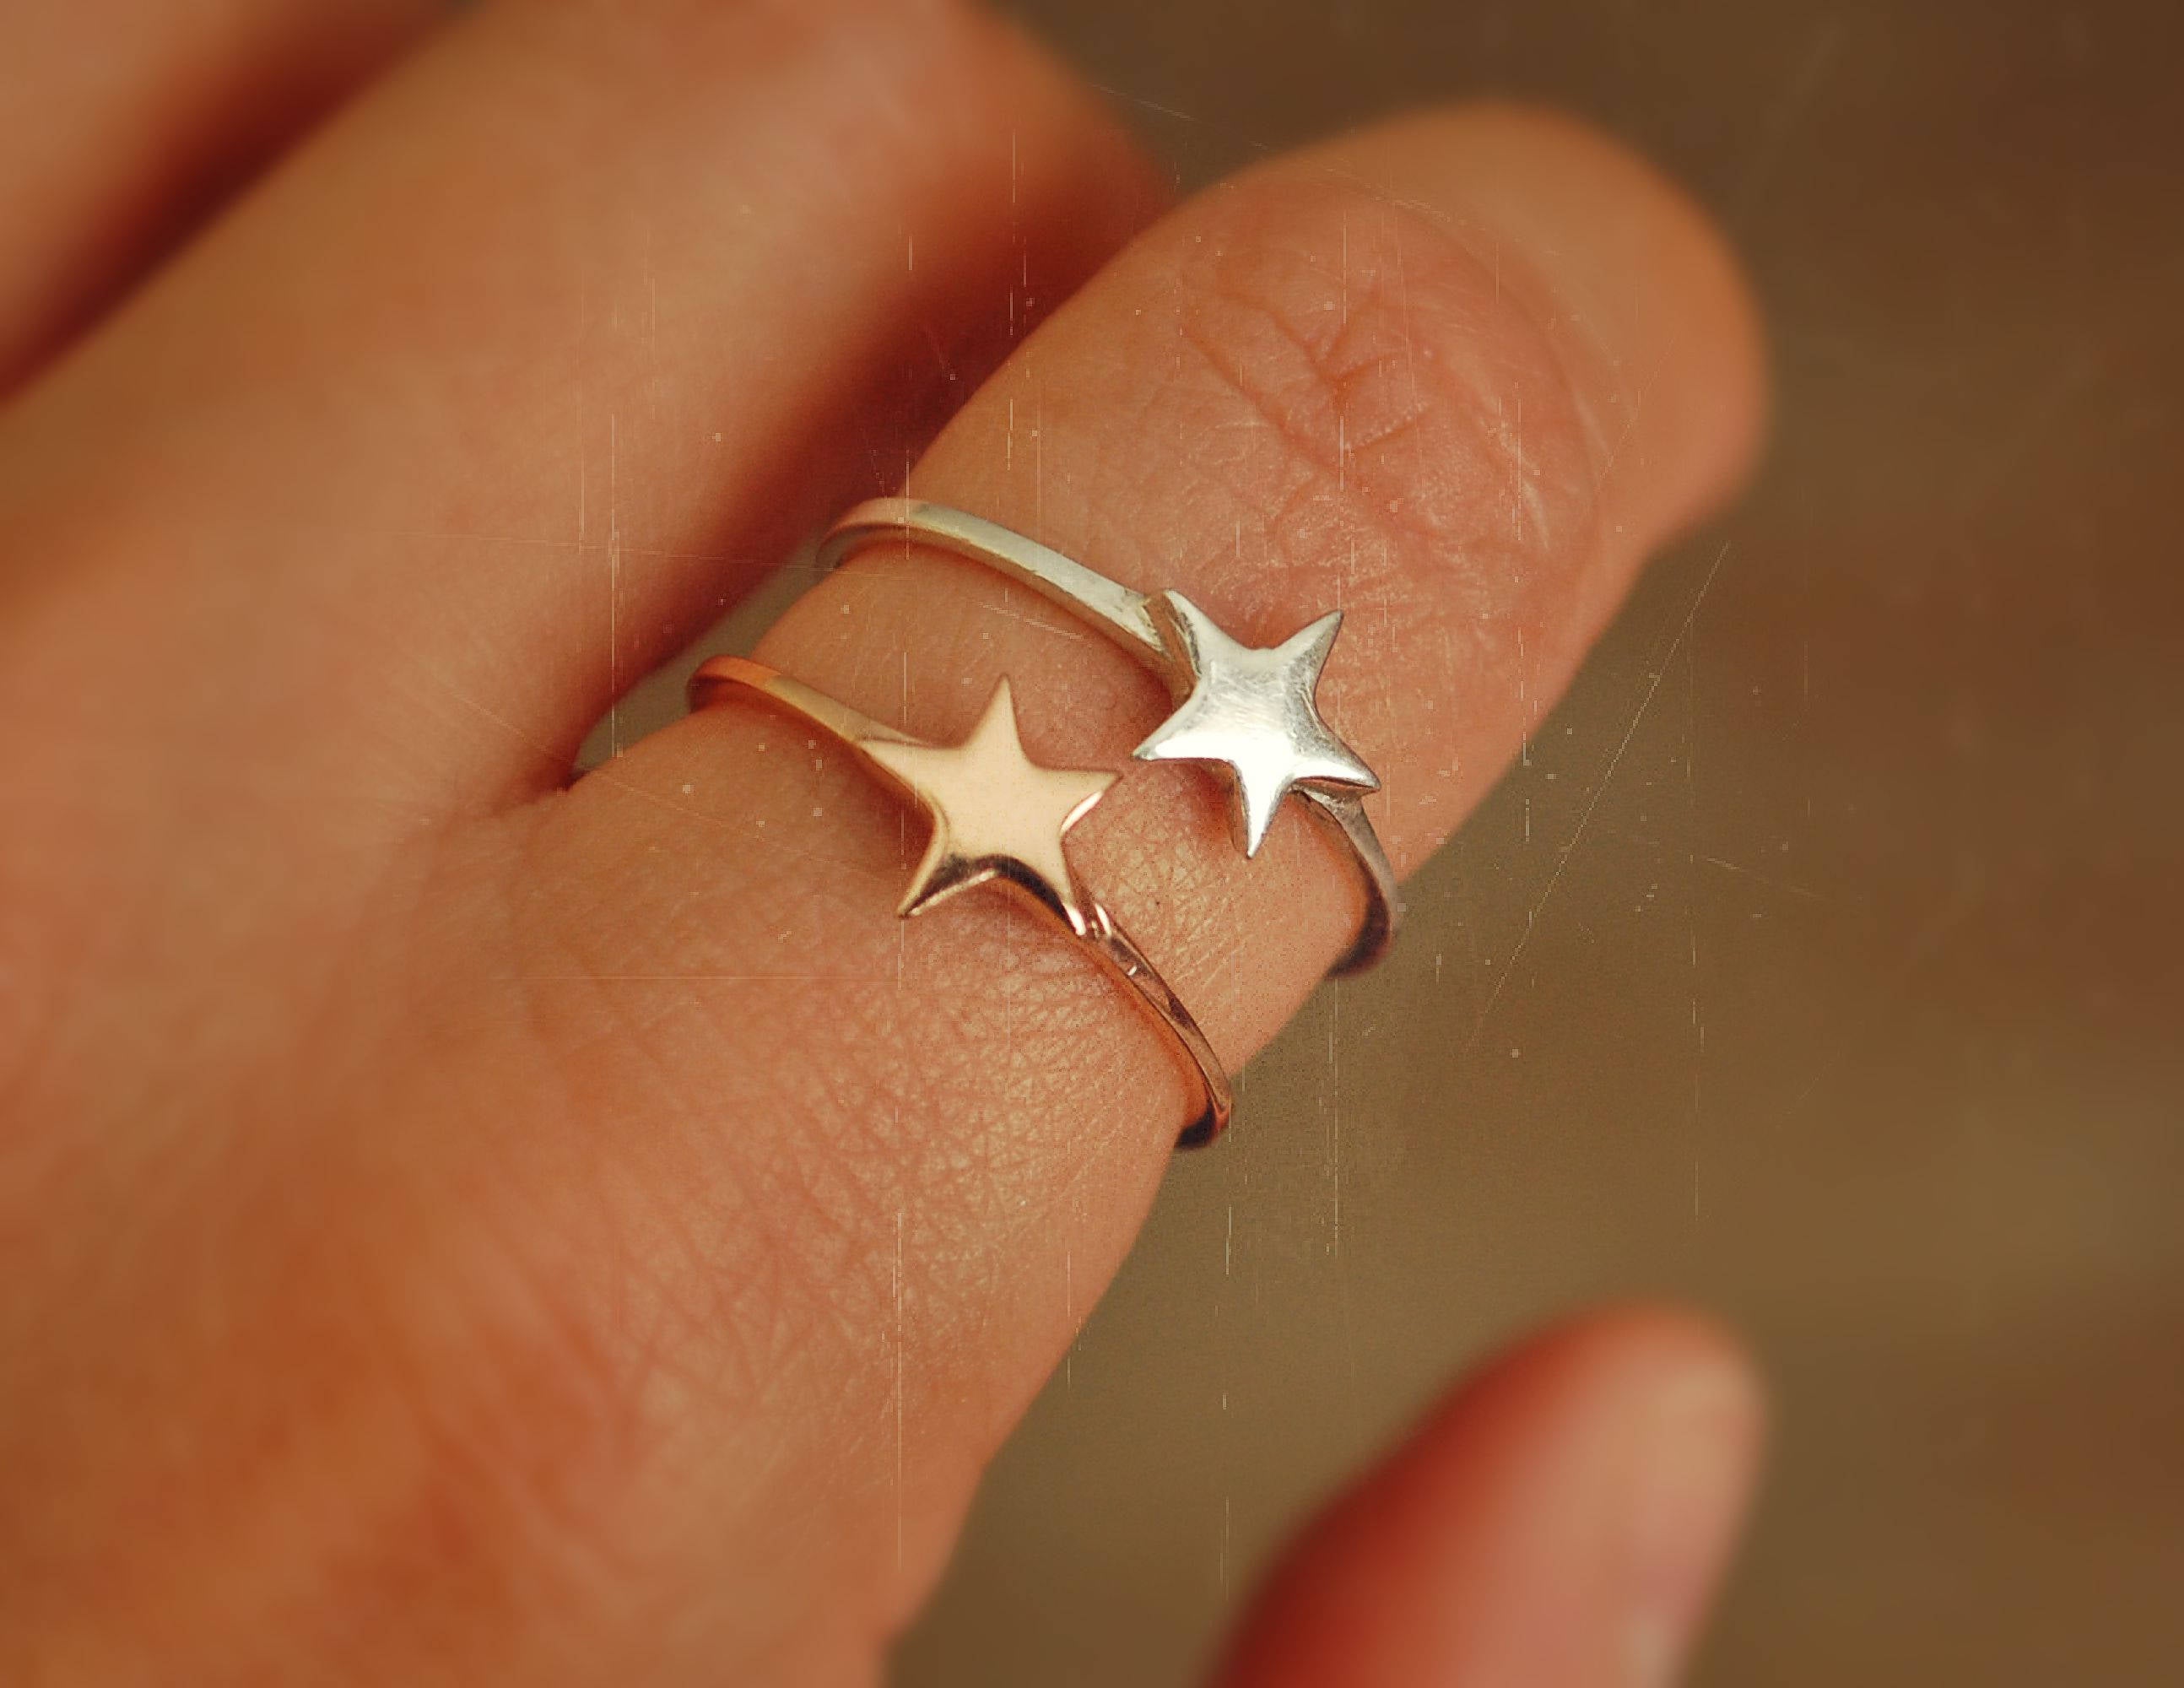 Star Ring in Sterling Silver and Rose Gold - Size 8 - Star Ring - - Boho Gypsy Star Ring